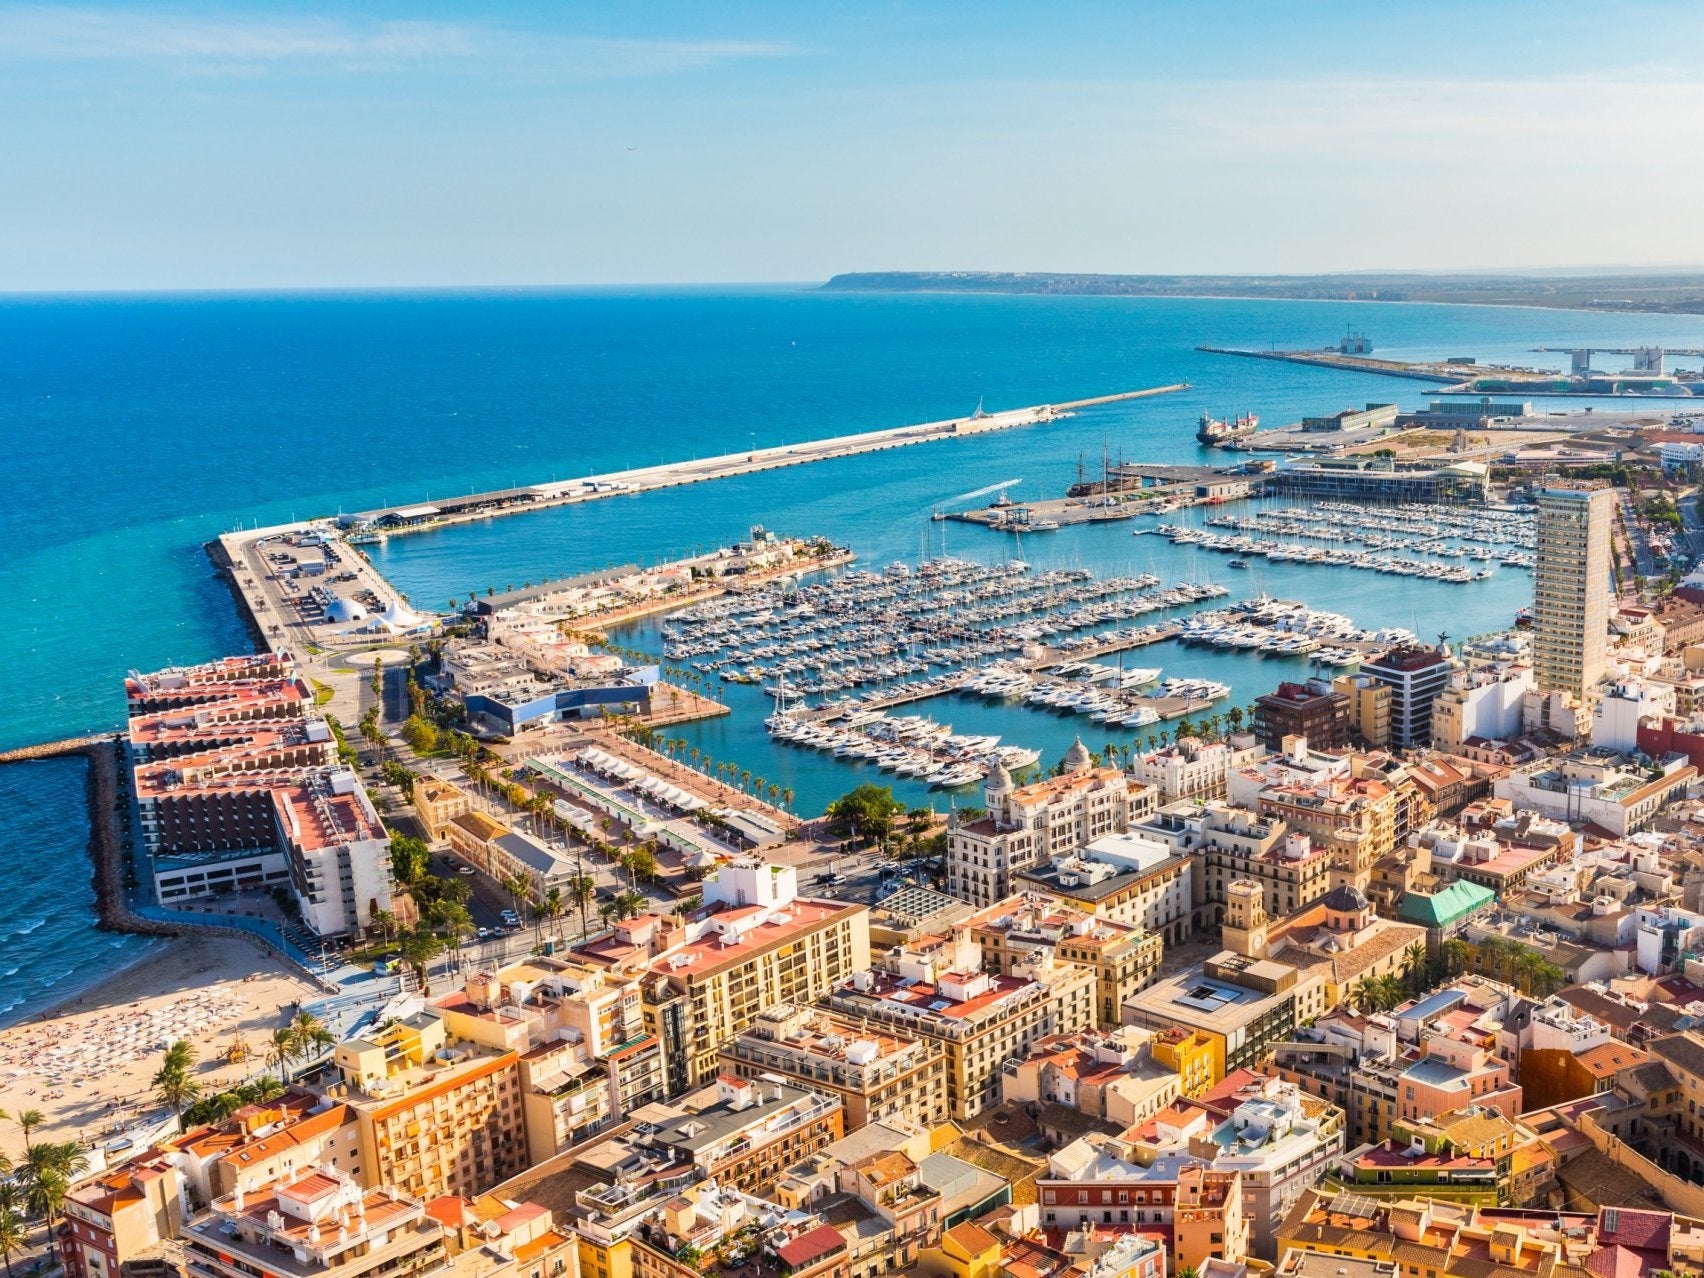 You could use the booking as the basis for a future Alicante trip